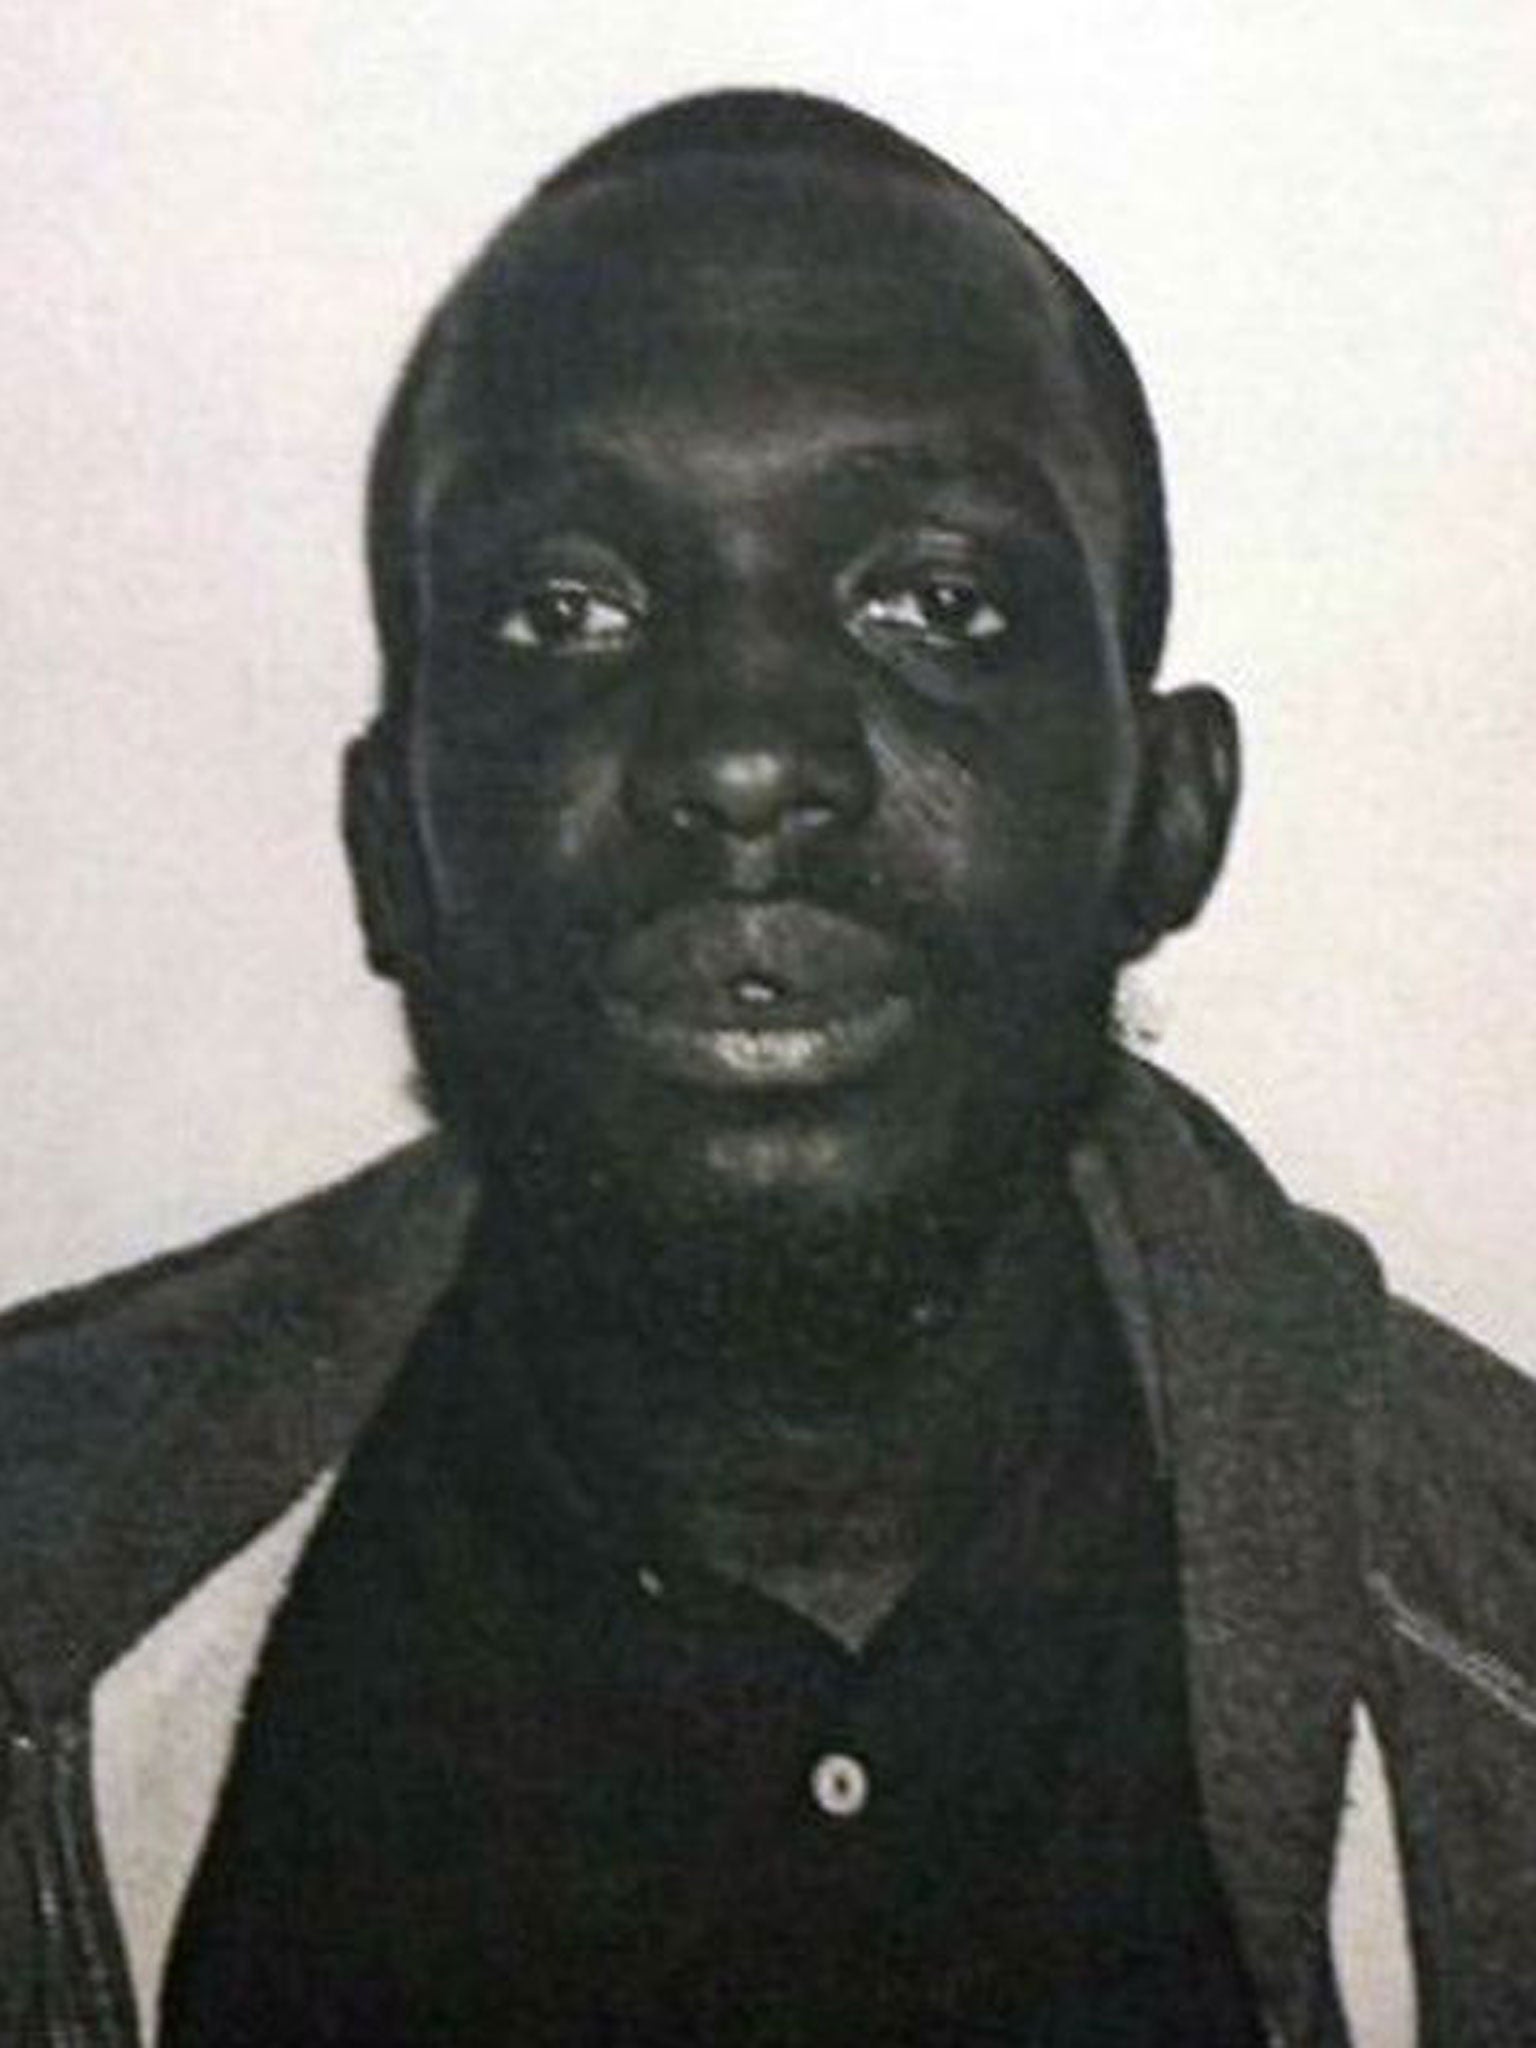 Undated handout photo issued by the Metropolitan Police of Lerone Michael Boye, 27, as Police in Hackney are appealing for assistance in tracing him after he absconded from a mental health centre in Homerton today.